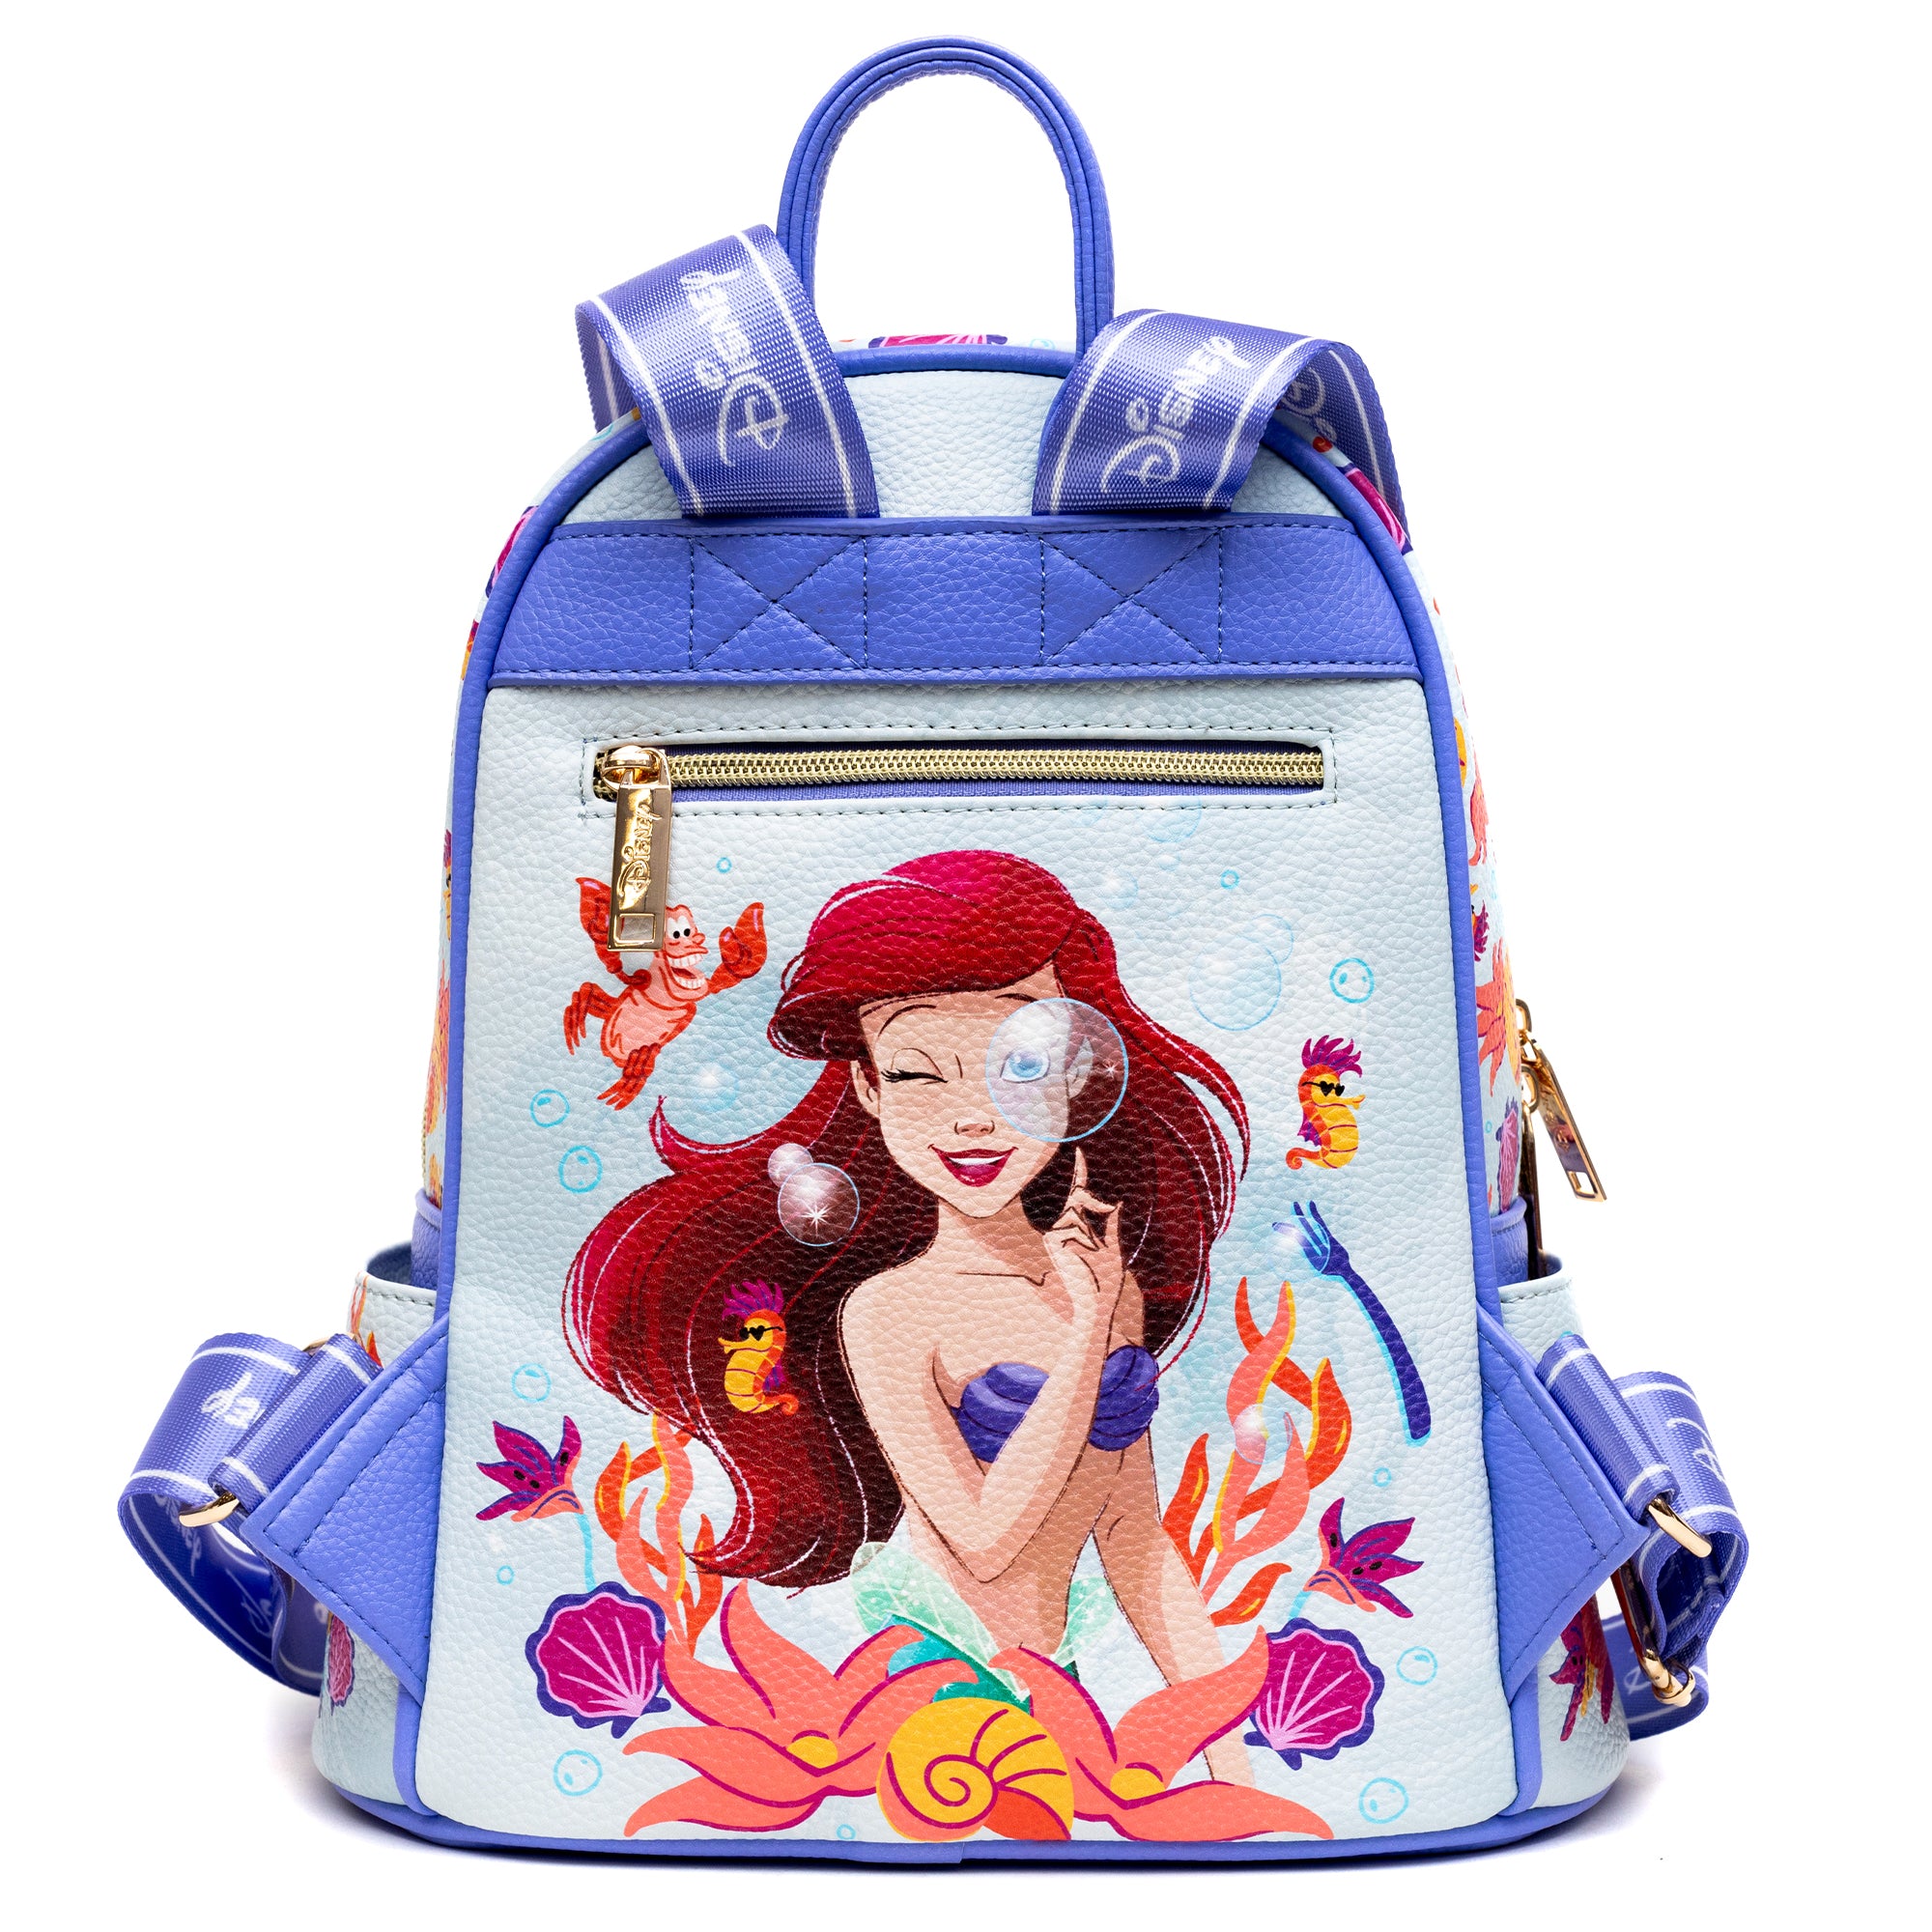 WondaPOP LUXE - Disney The Little Mermaid Mini Backpack - Limited Edition - NEW RELEASE